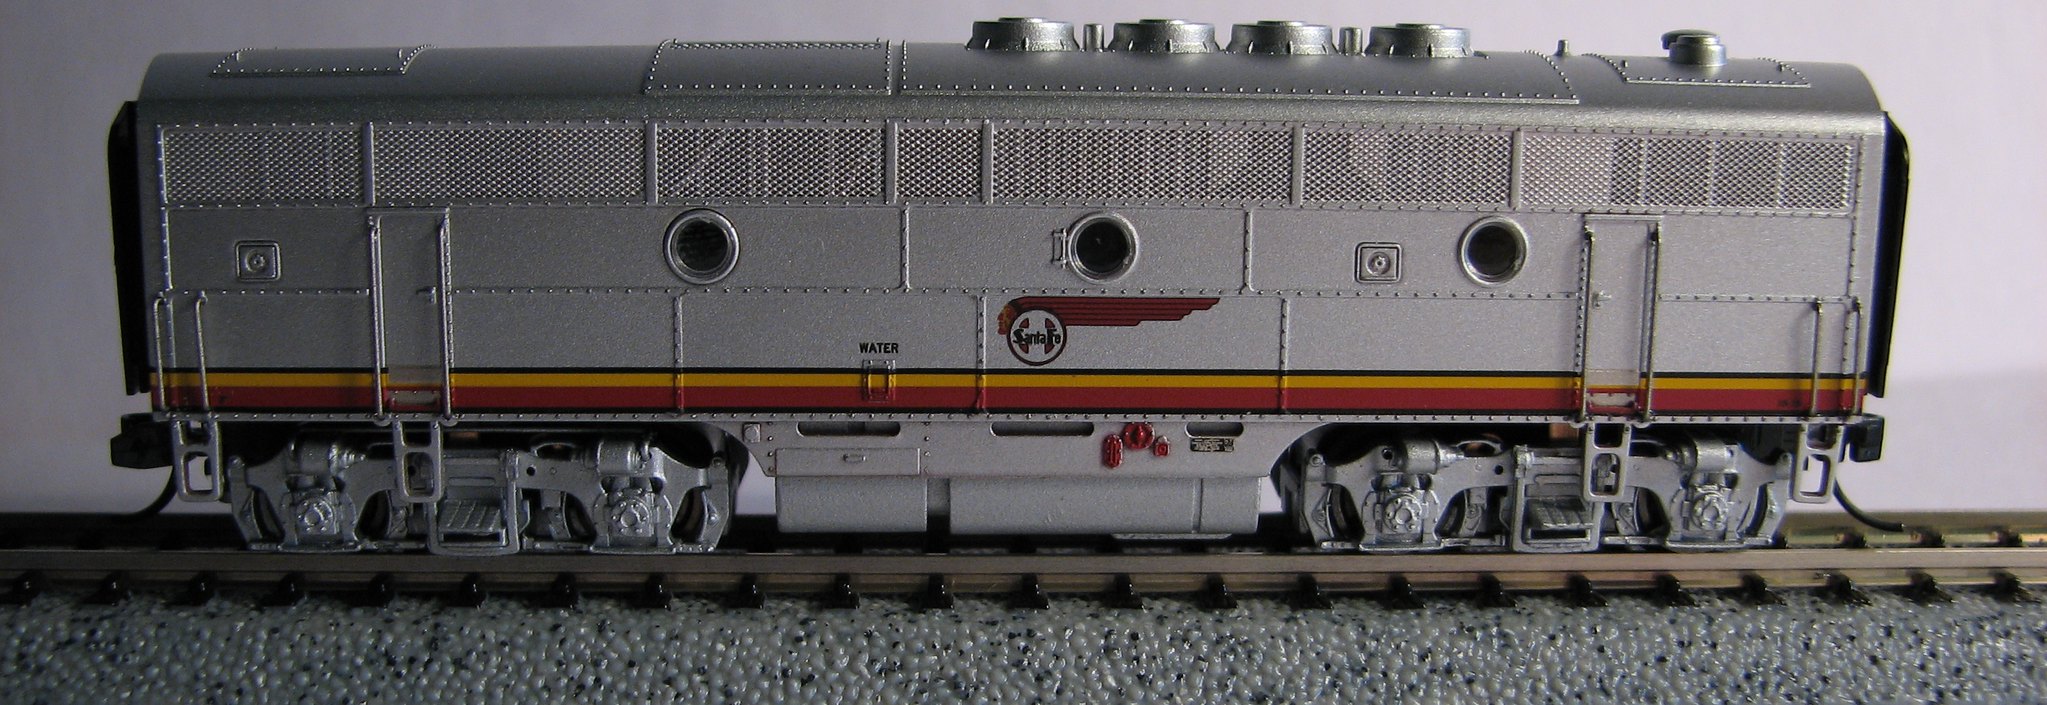 NEW N gauge Southern Pacific Daylight EM Diesel Body shell Details about   "Bachmann" 